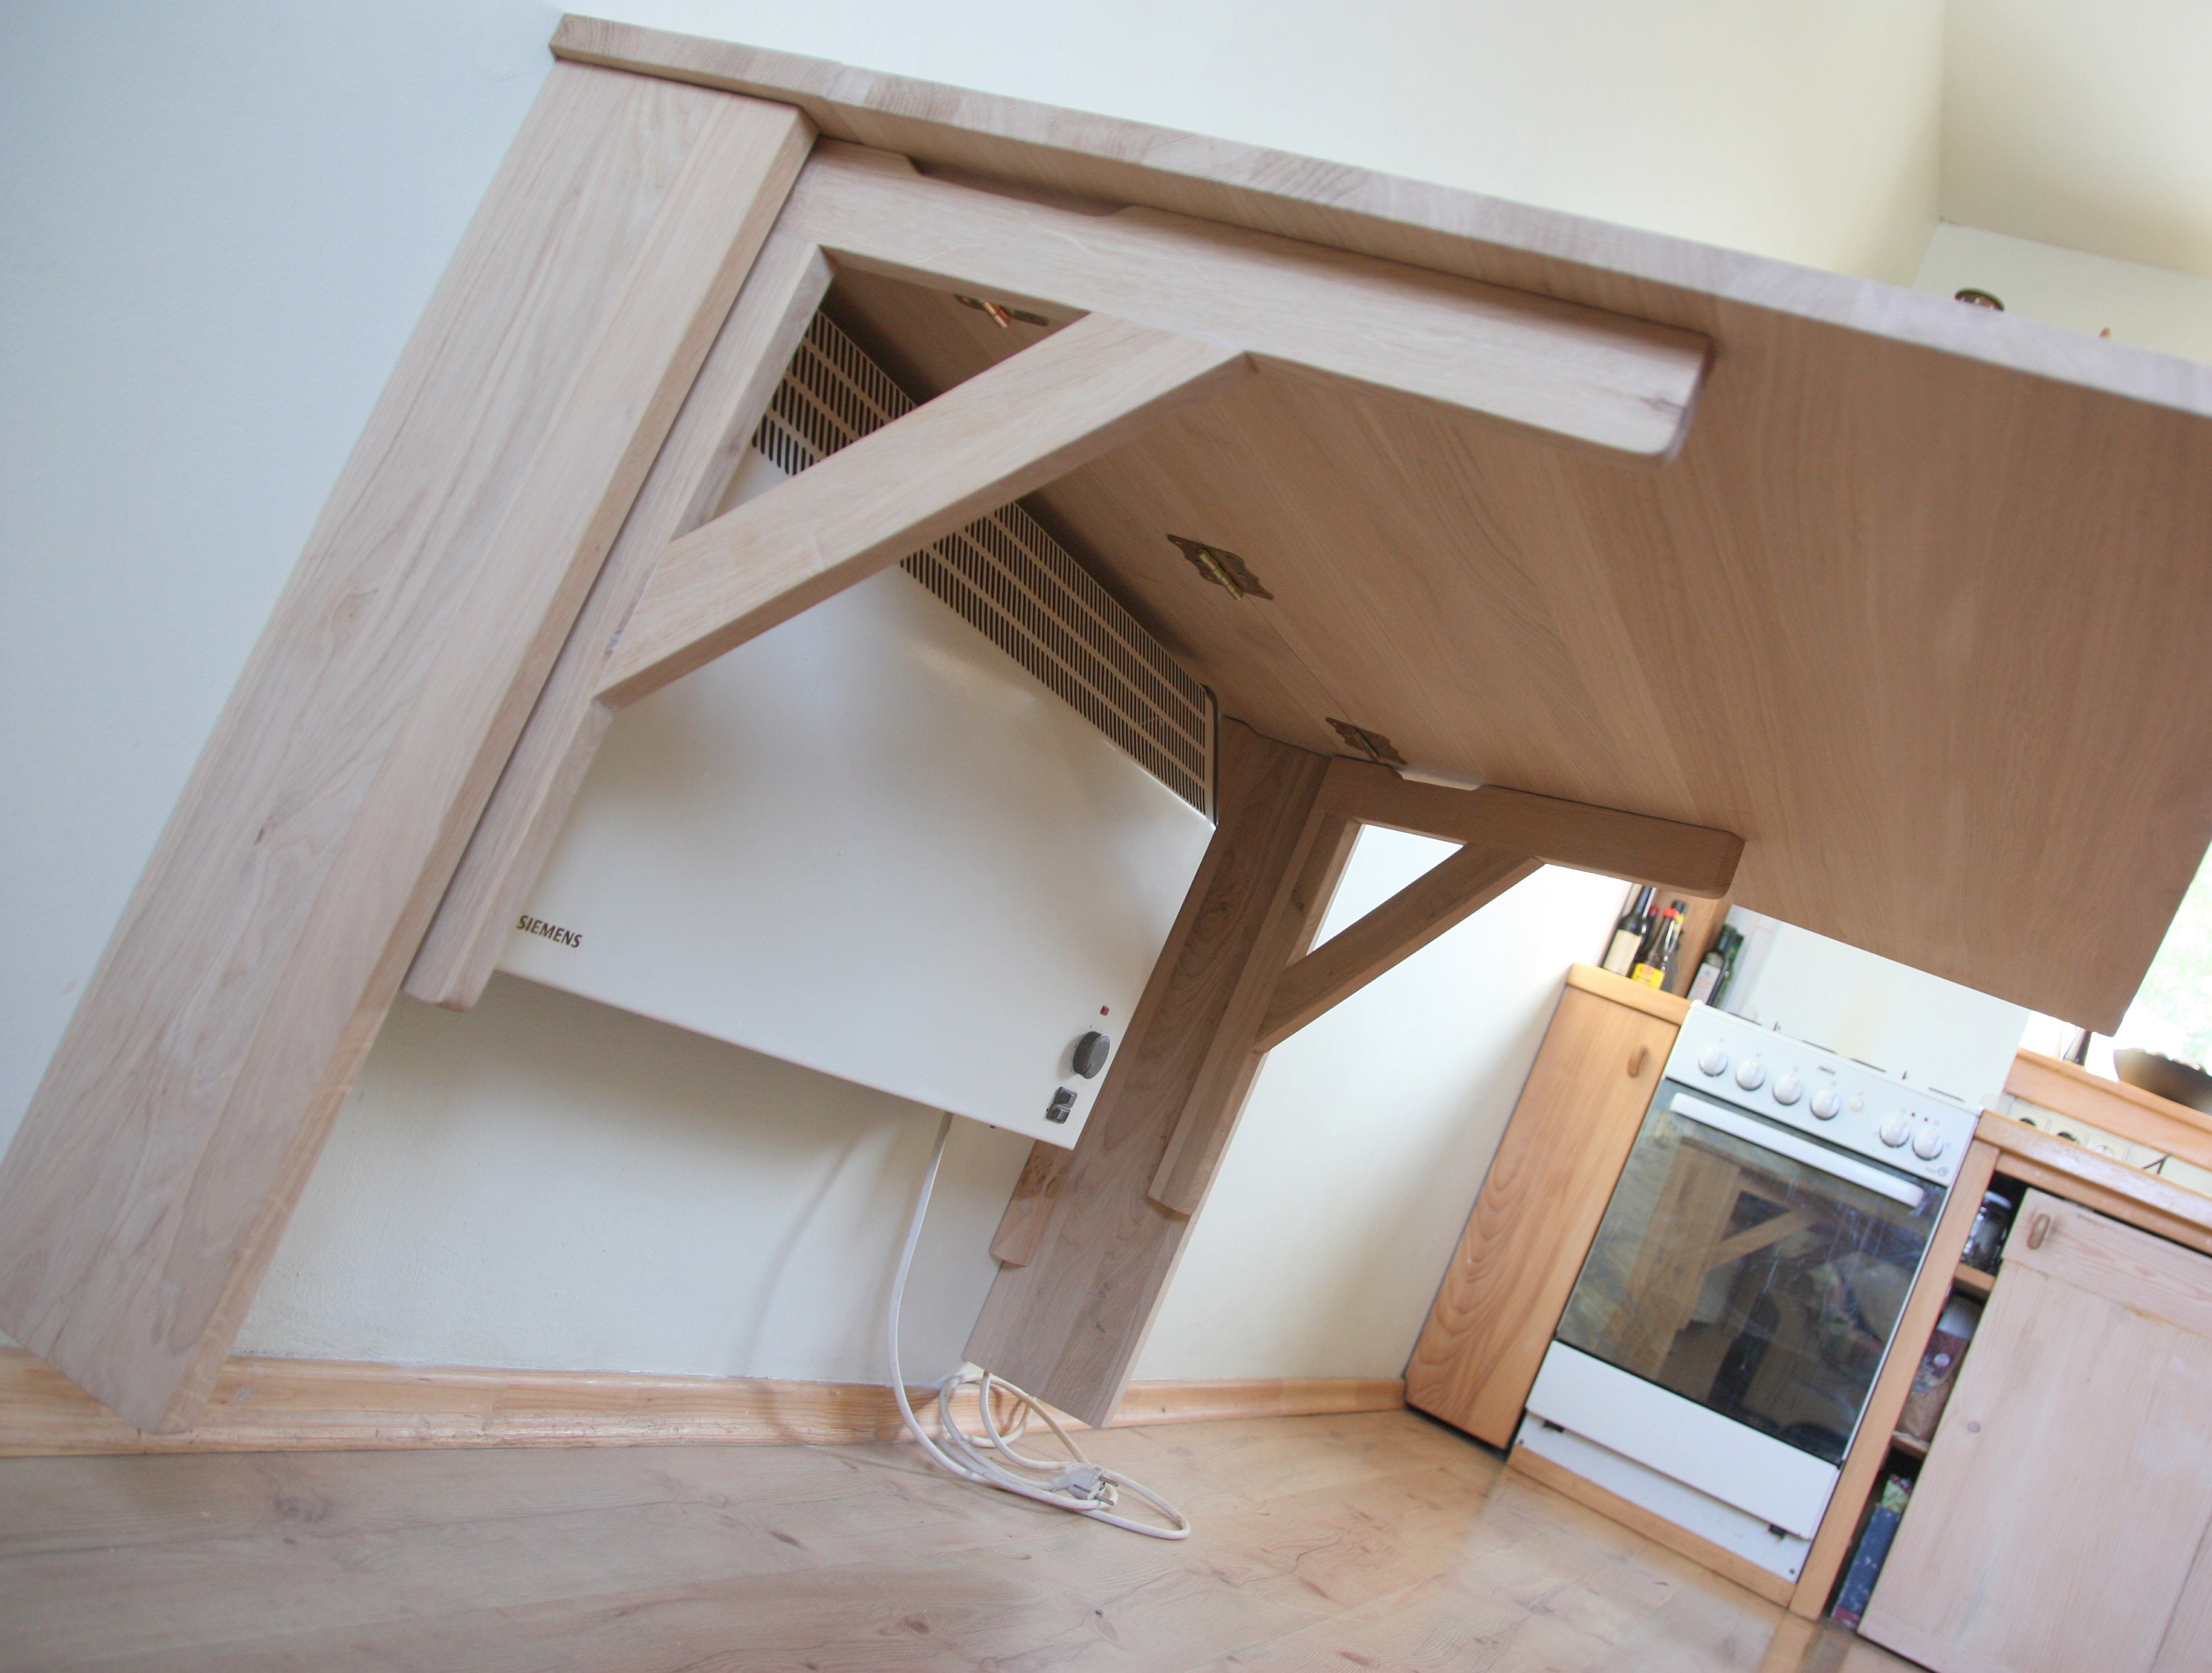 Wall Folding Table in Solid Oak Above a Radiator Wall Mounted Drop